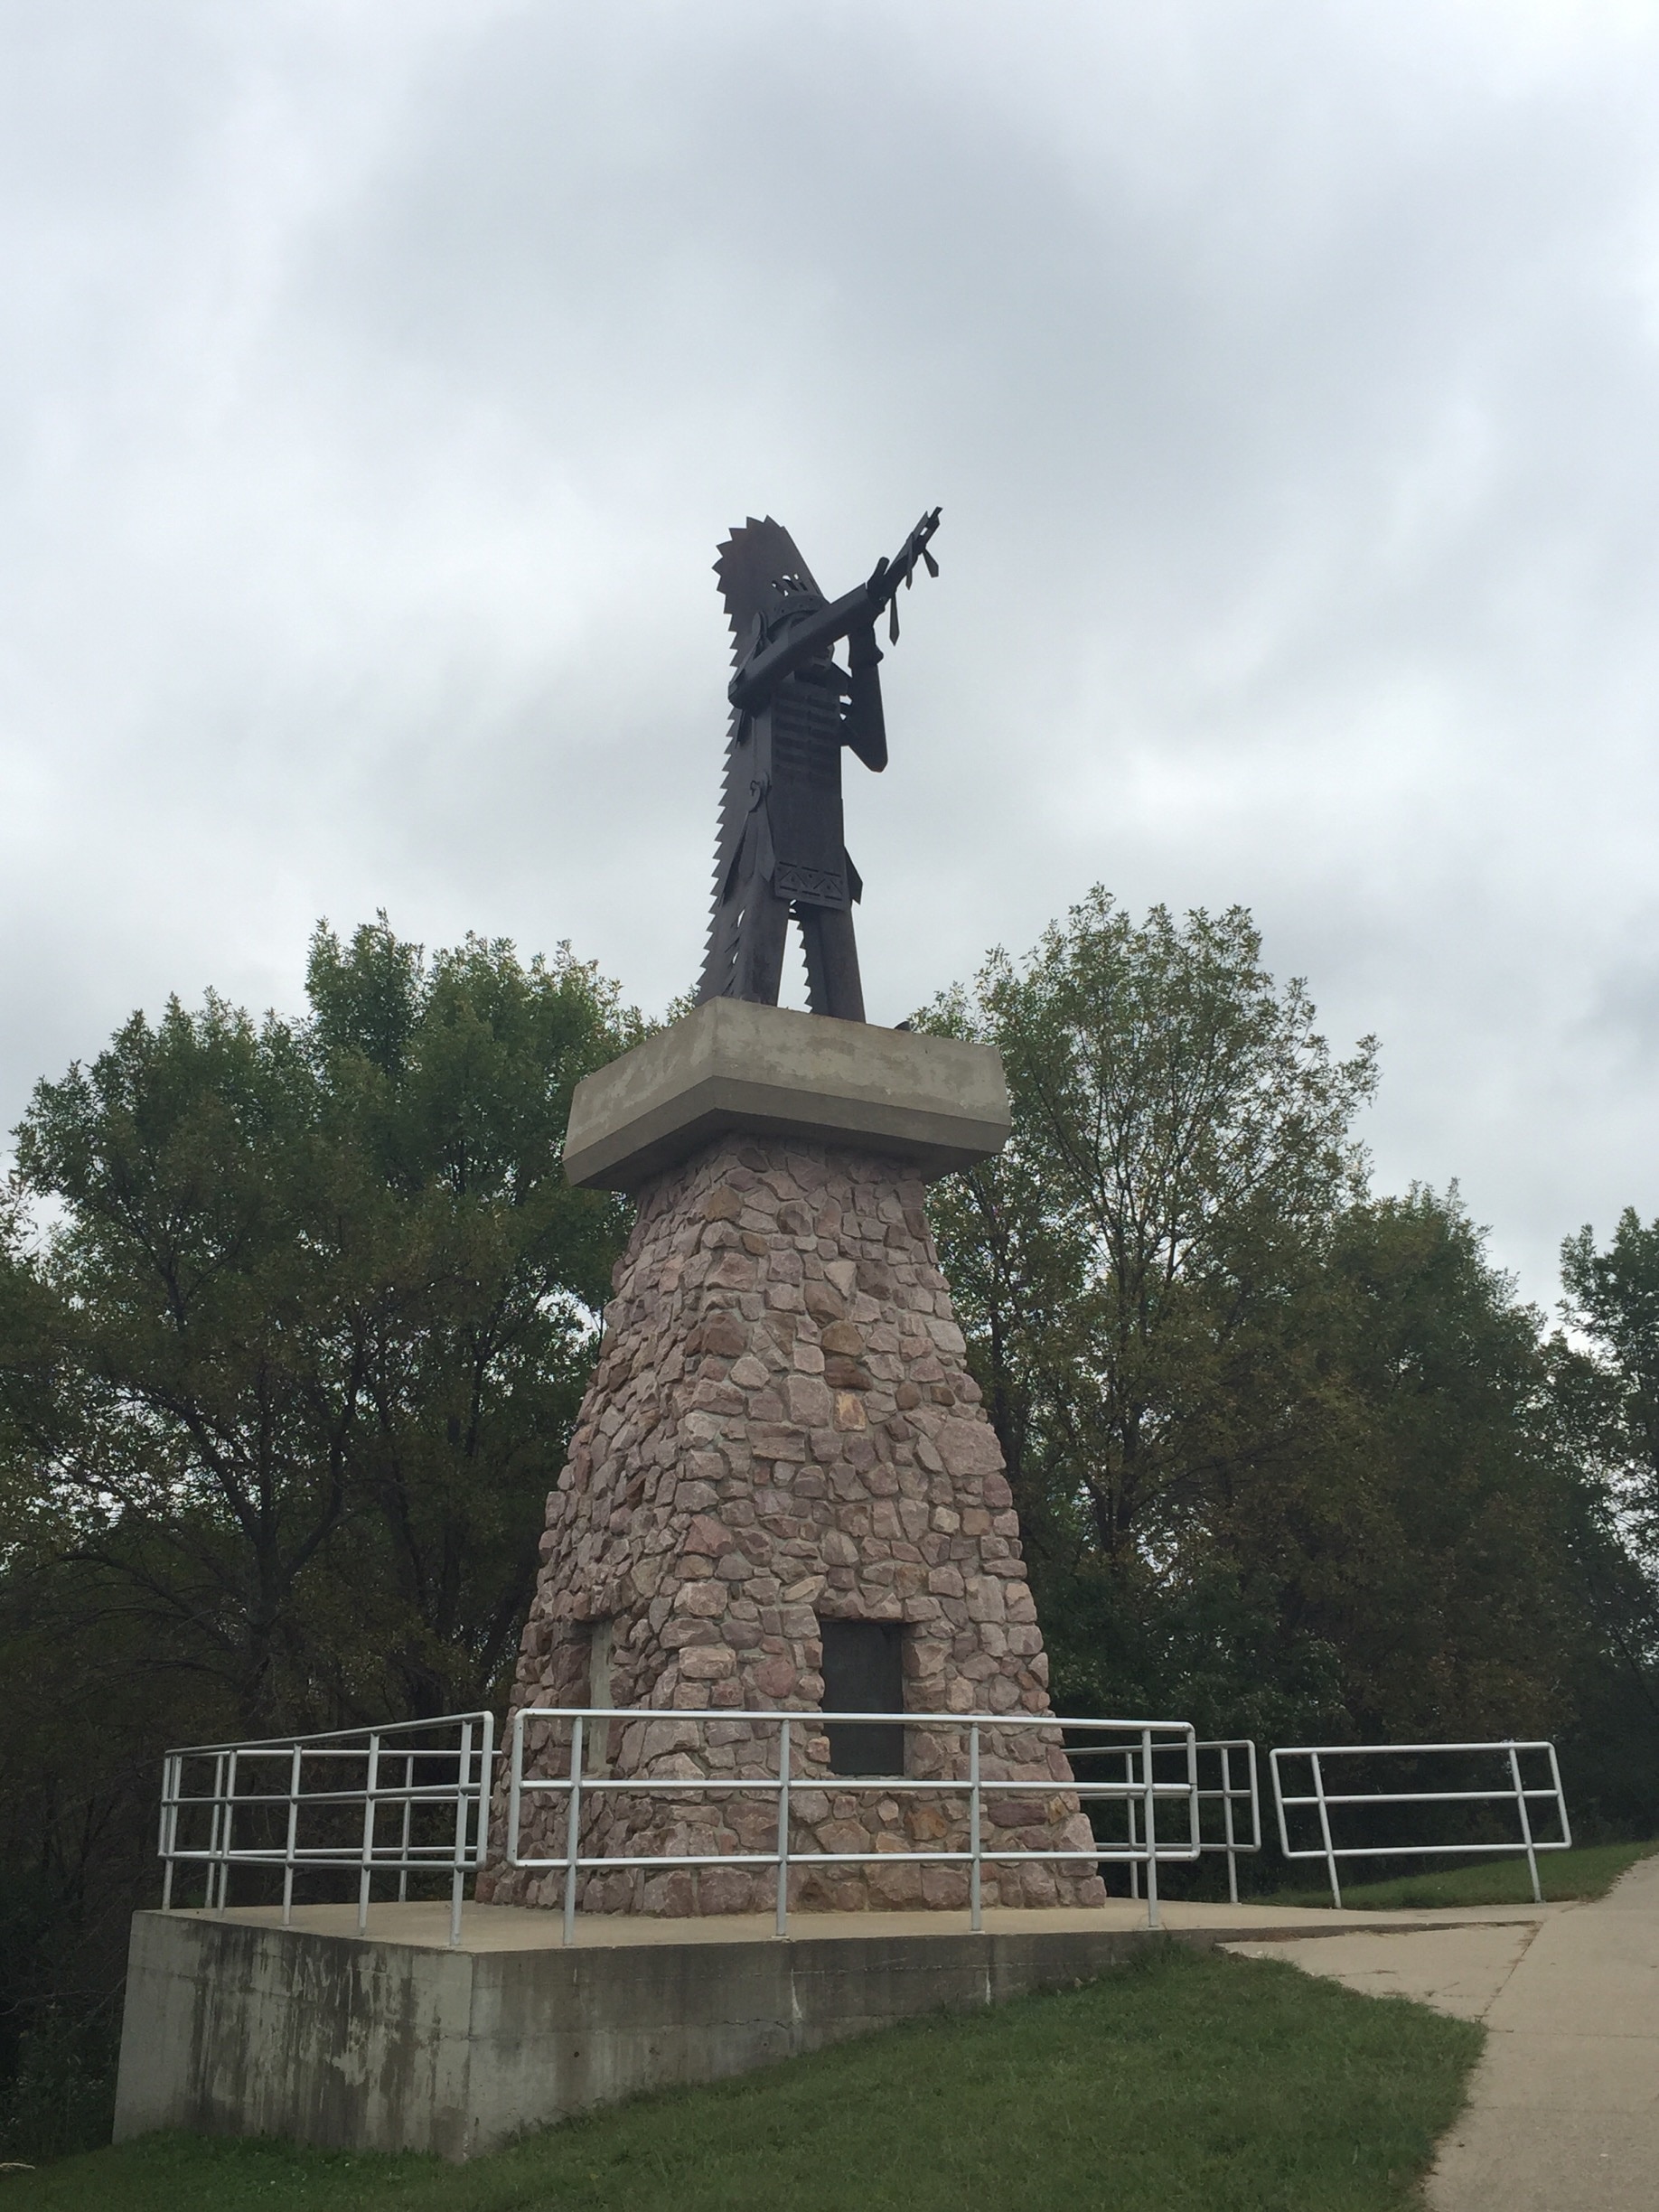 Chief War Eagle is buried at the top of a high bluff near the confluence of the Missouri and Big Sioux Rivers. A large sculpture depicting him with a peace pipe marks this spot. He was a Sioux Indian Chief that promoted peace with pioneers settling the western frontier.